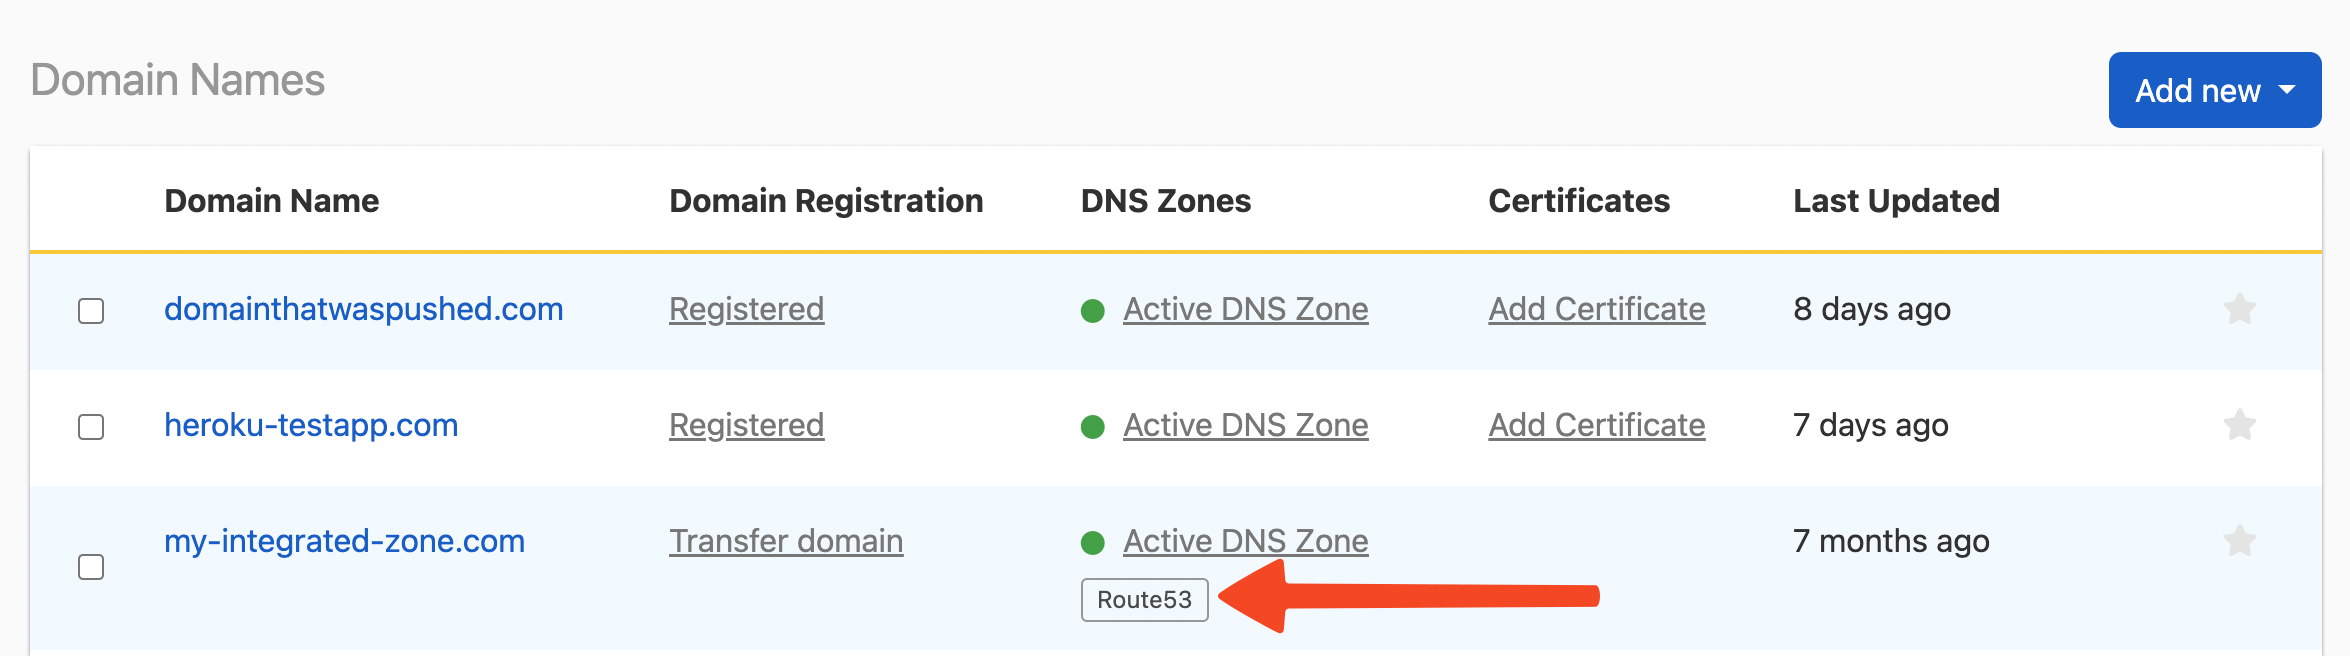 Domain Names Integrated Zones Table